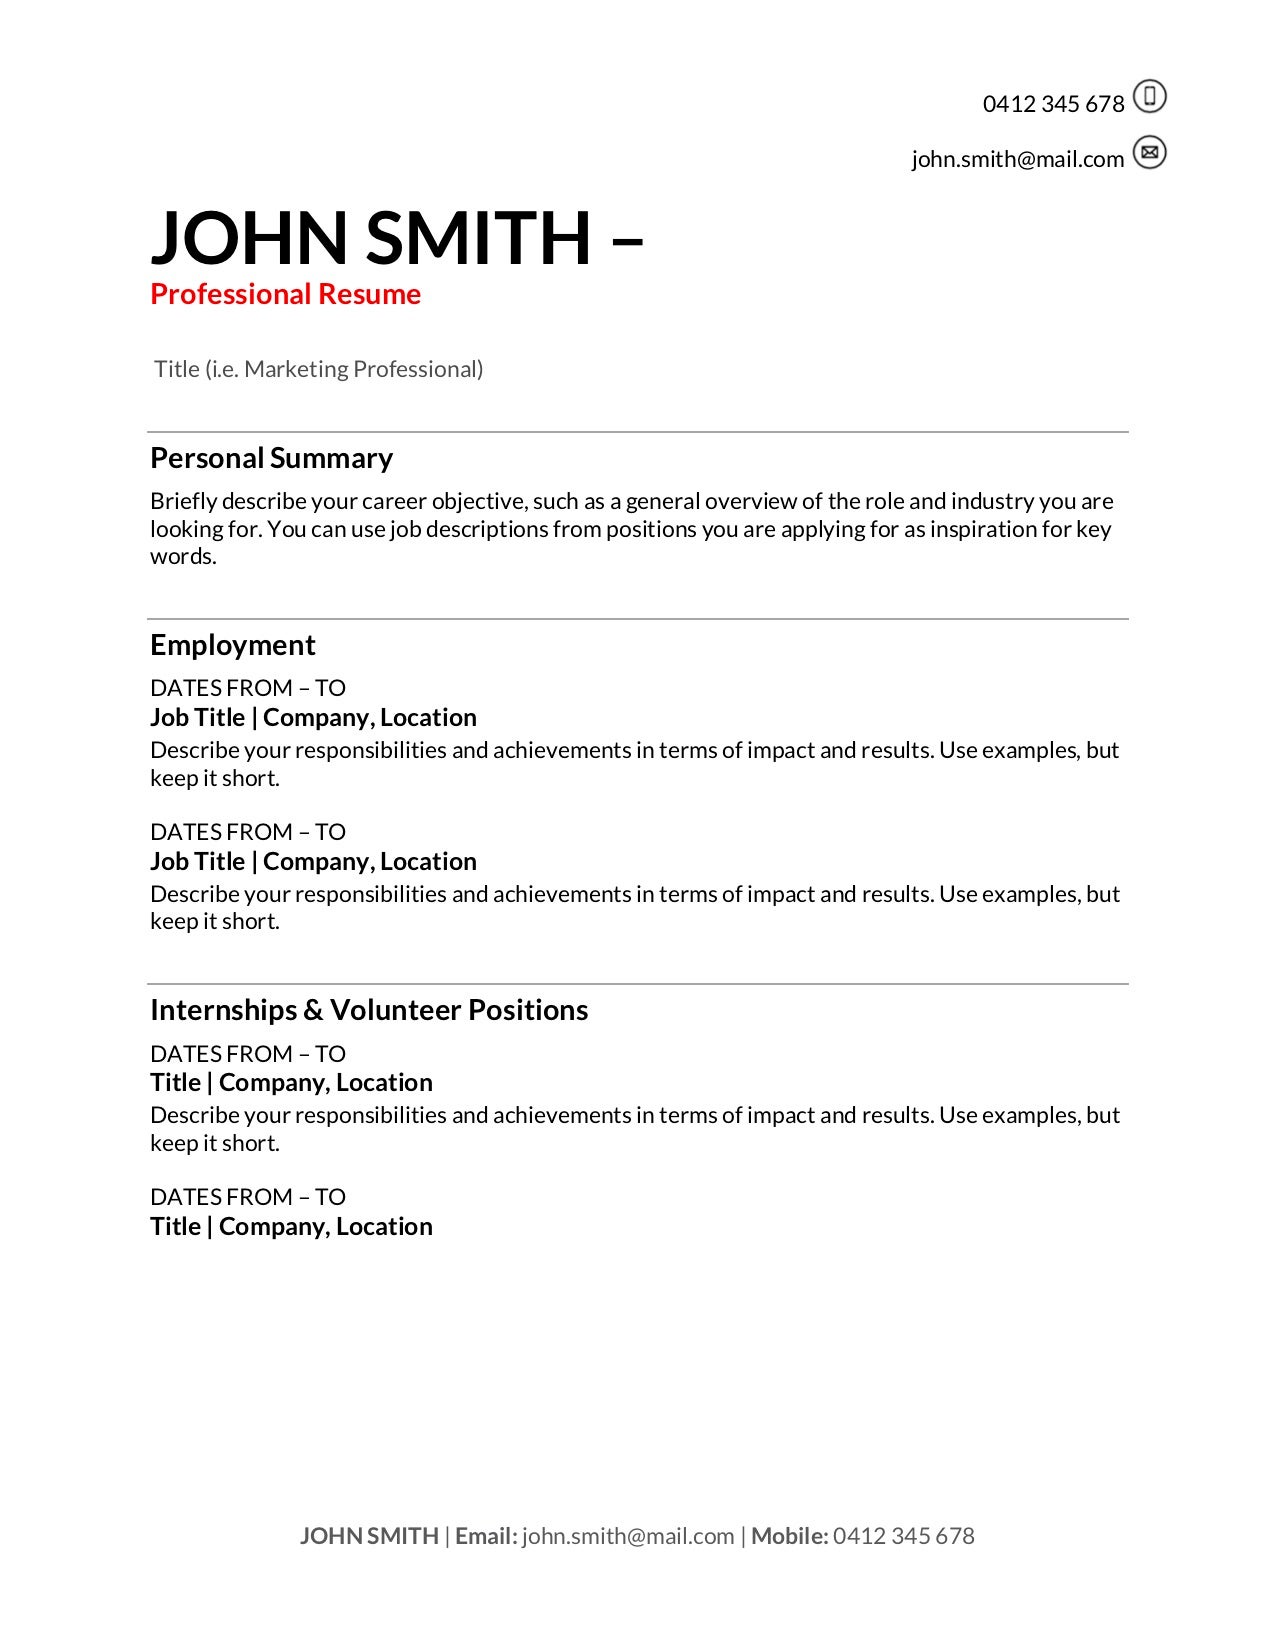 Template For Resumes from www.training.com.au